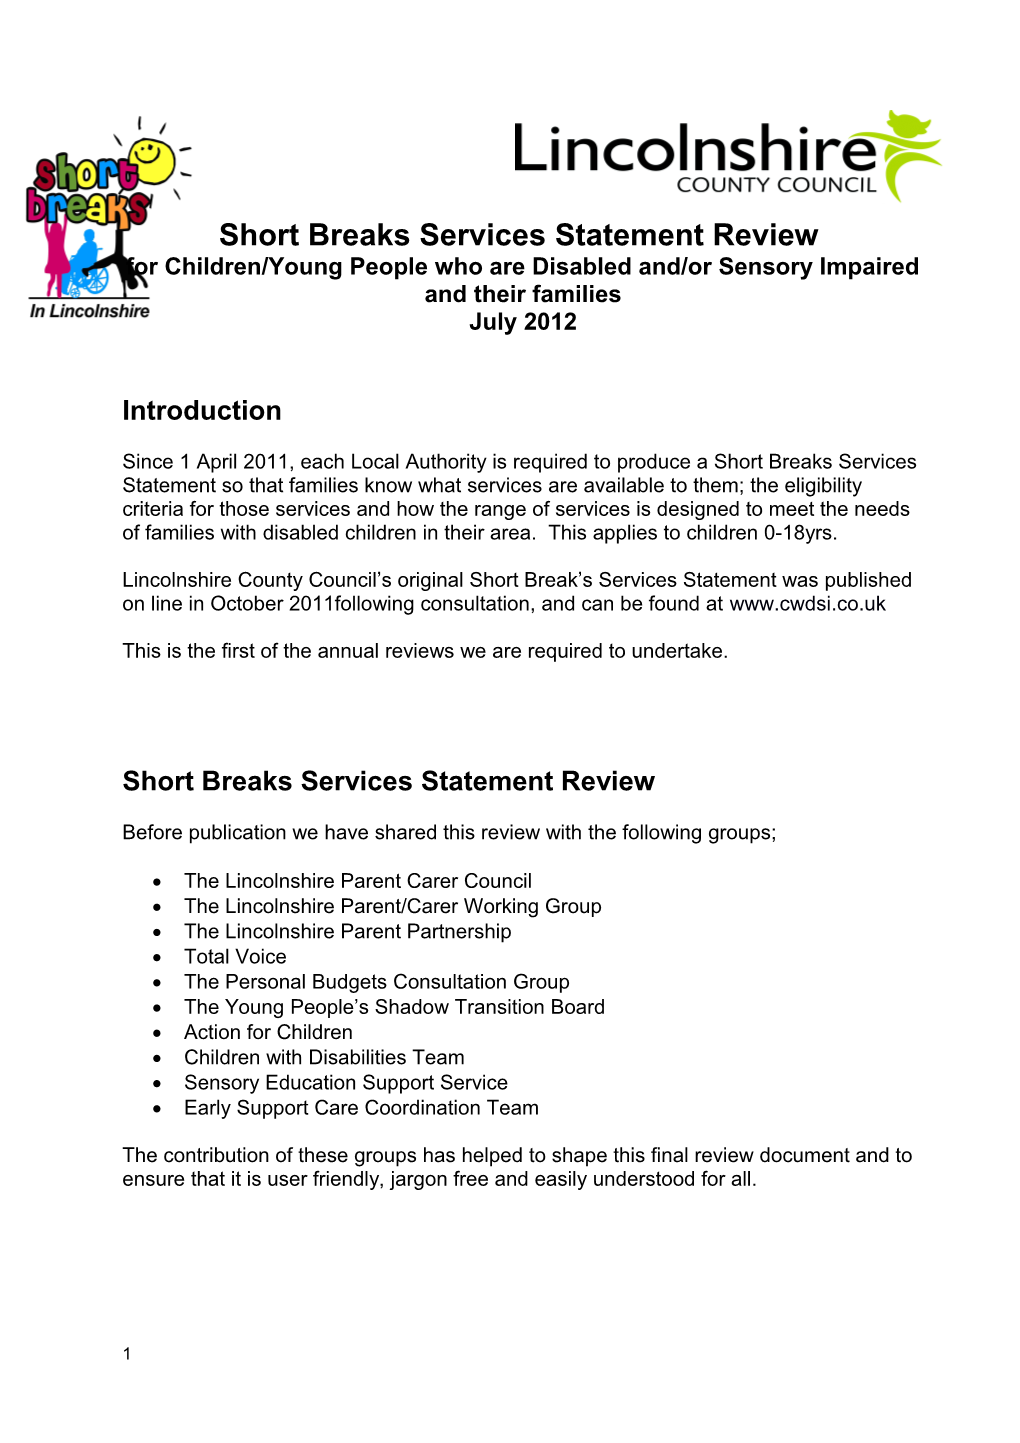 The Short Breaks Services Statement Review for Children and Young People Who Are Sensory